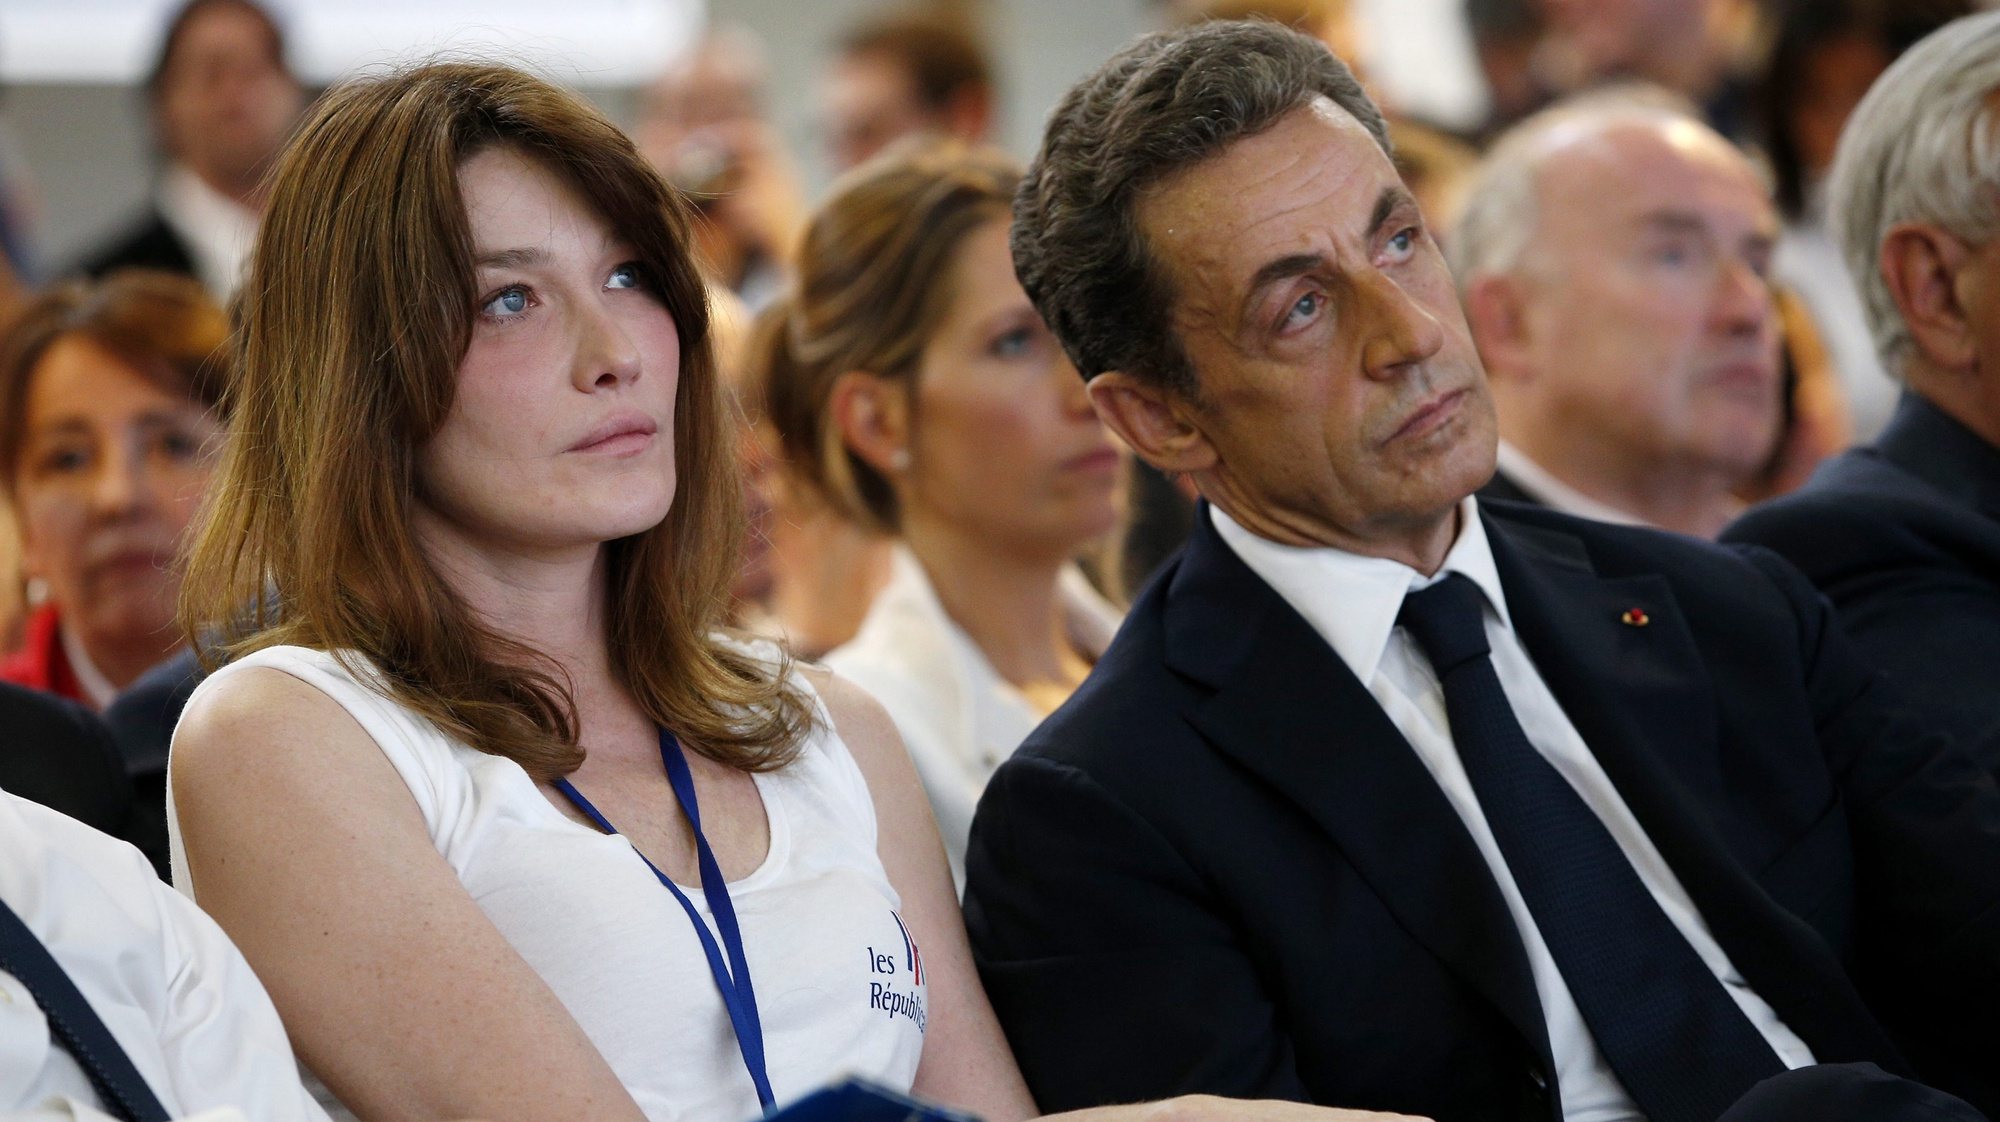 epa04775831 Former French President Nicolas Sarkozy (R) sits with his wife Carla Bruni Sarkozy (L) during the first congress of the new conservative party &#039;Les Republicains&#039;, in Paris, France, 30 May 2015. A French court dismissed objections Tuesday to a proposed name change for one of the country&#039;s leading political parties, clearing the way for Sarkozy&#039;s Union for a Popular Movement (UMP) to become The Republicans.  EPA/YOAN VALAT